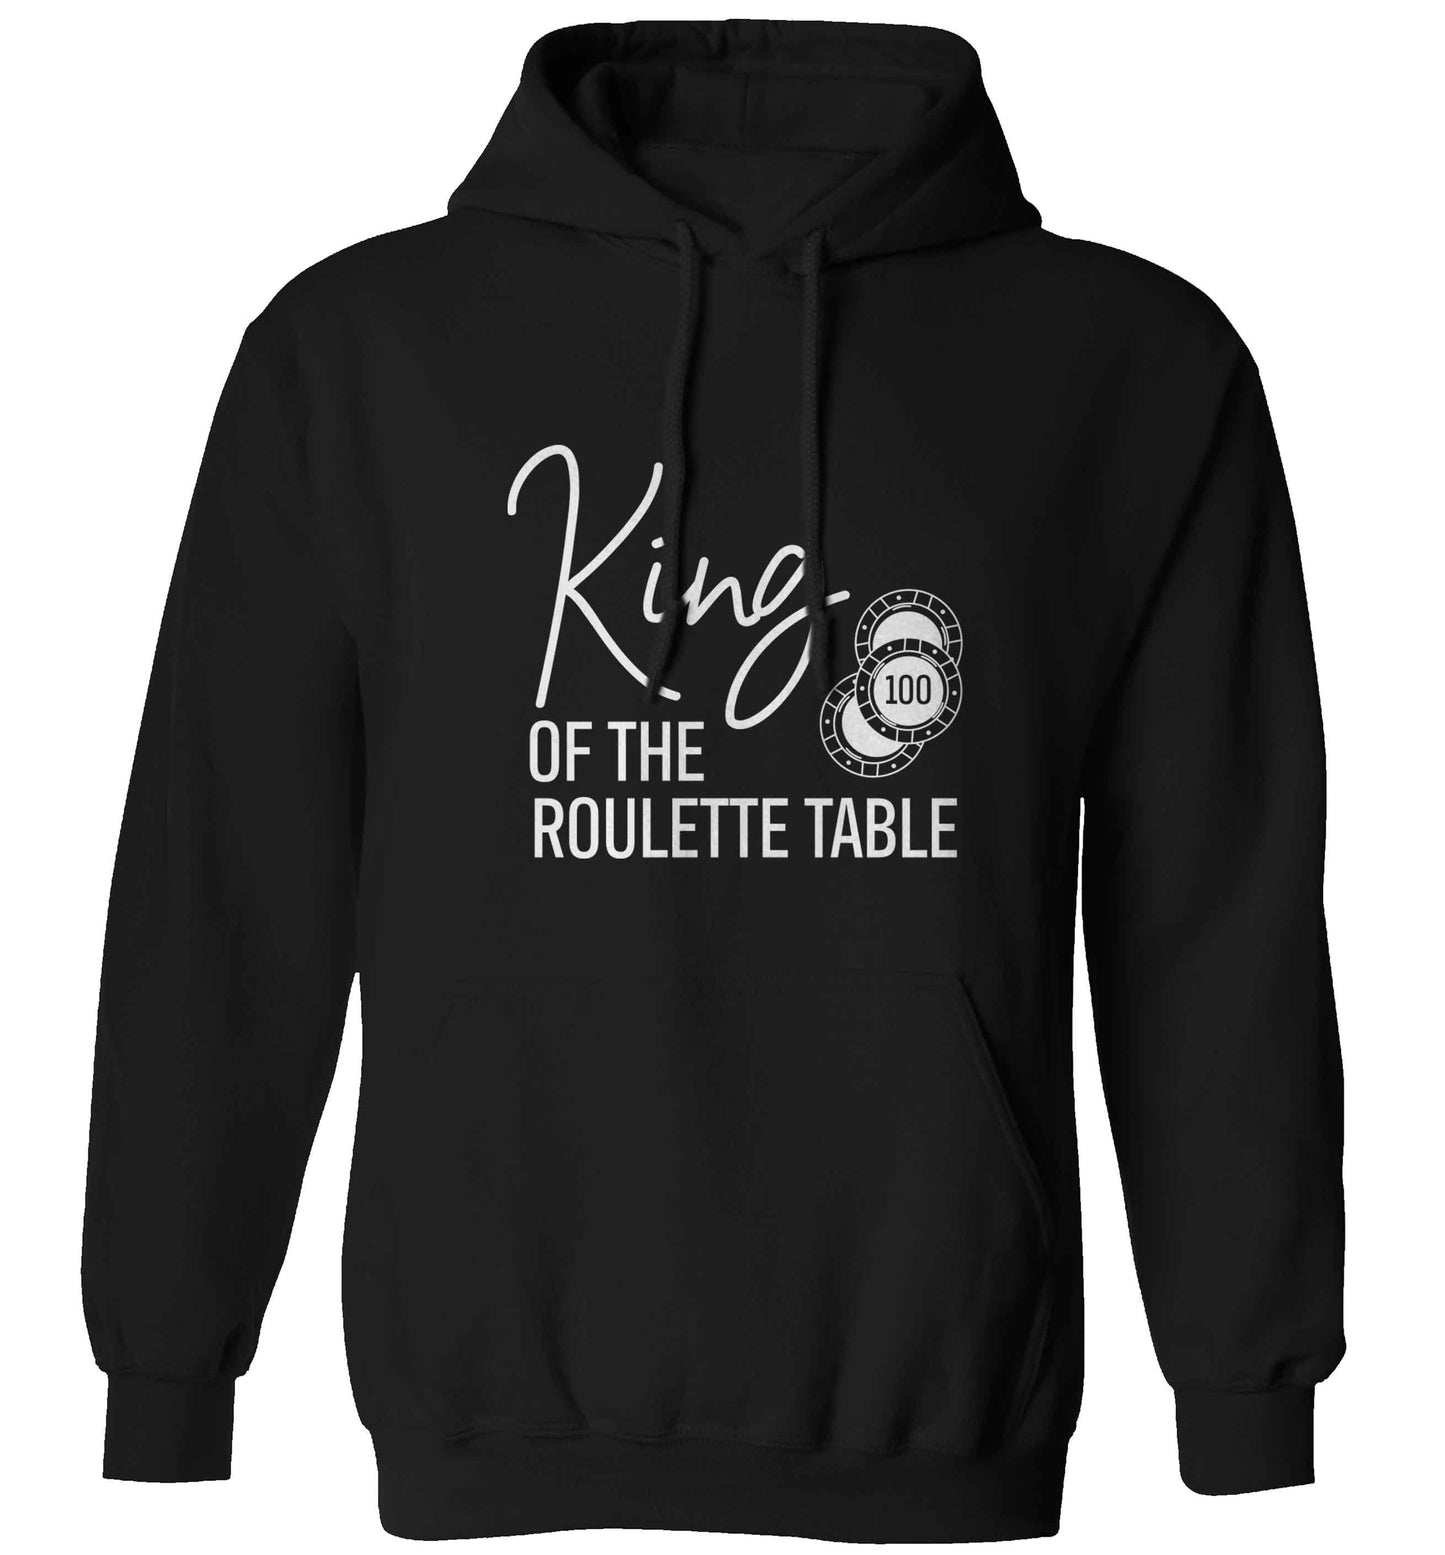 King of the roulette table adults unisex black hoodie 2XL